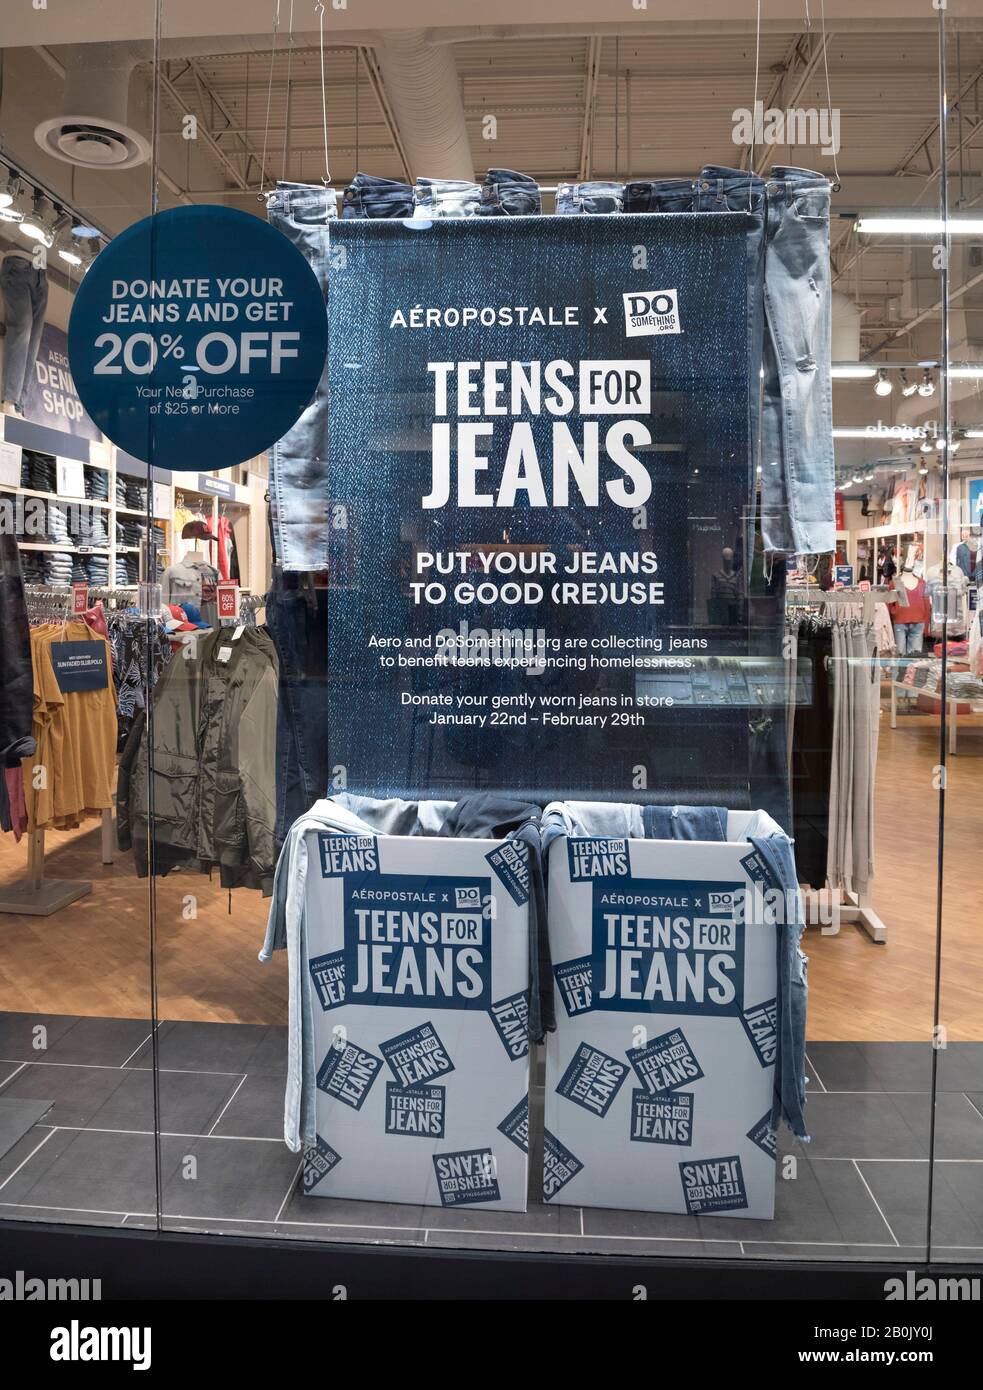 Teens For Jeans by clothing store Aeropostale is collecting